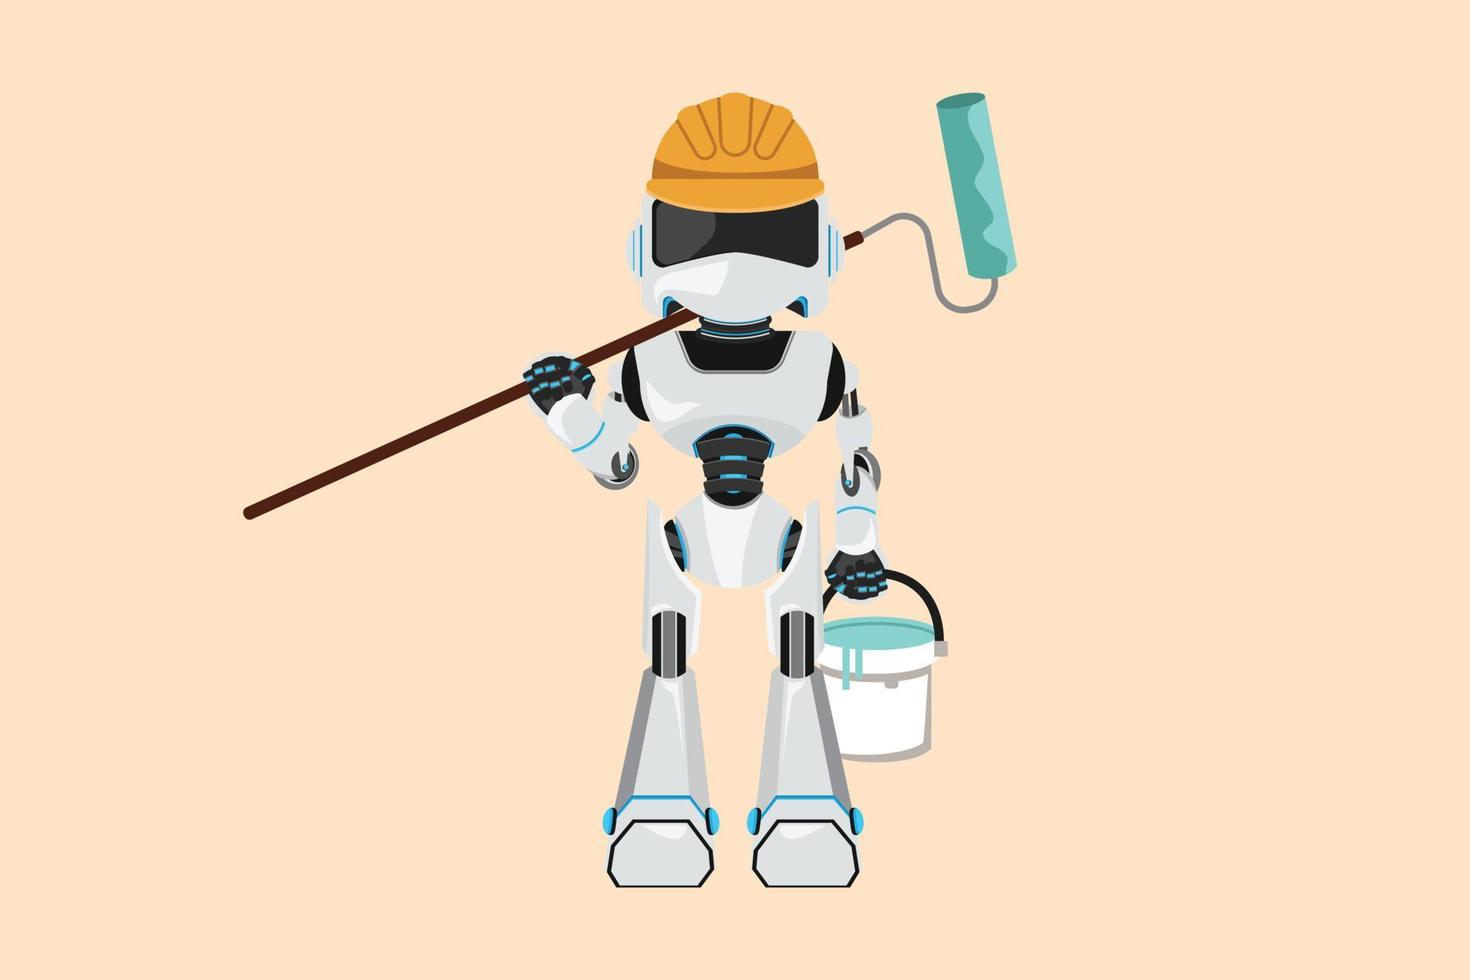 Business design drawing robot painter standing with bucket and paint roller. Robot worker working on apartment or home renovation. Future technology development. Flat cartoon style vector illustration